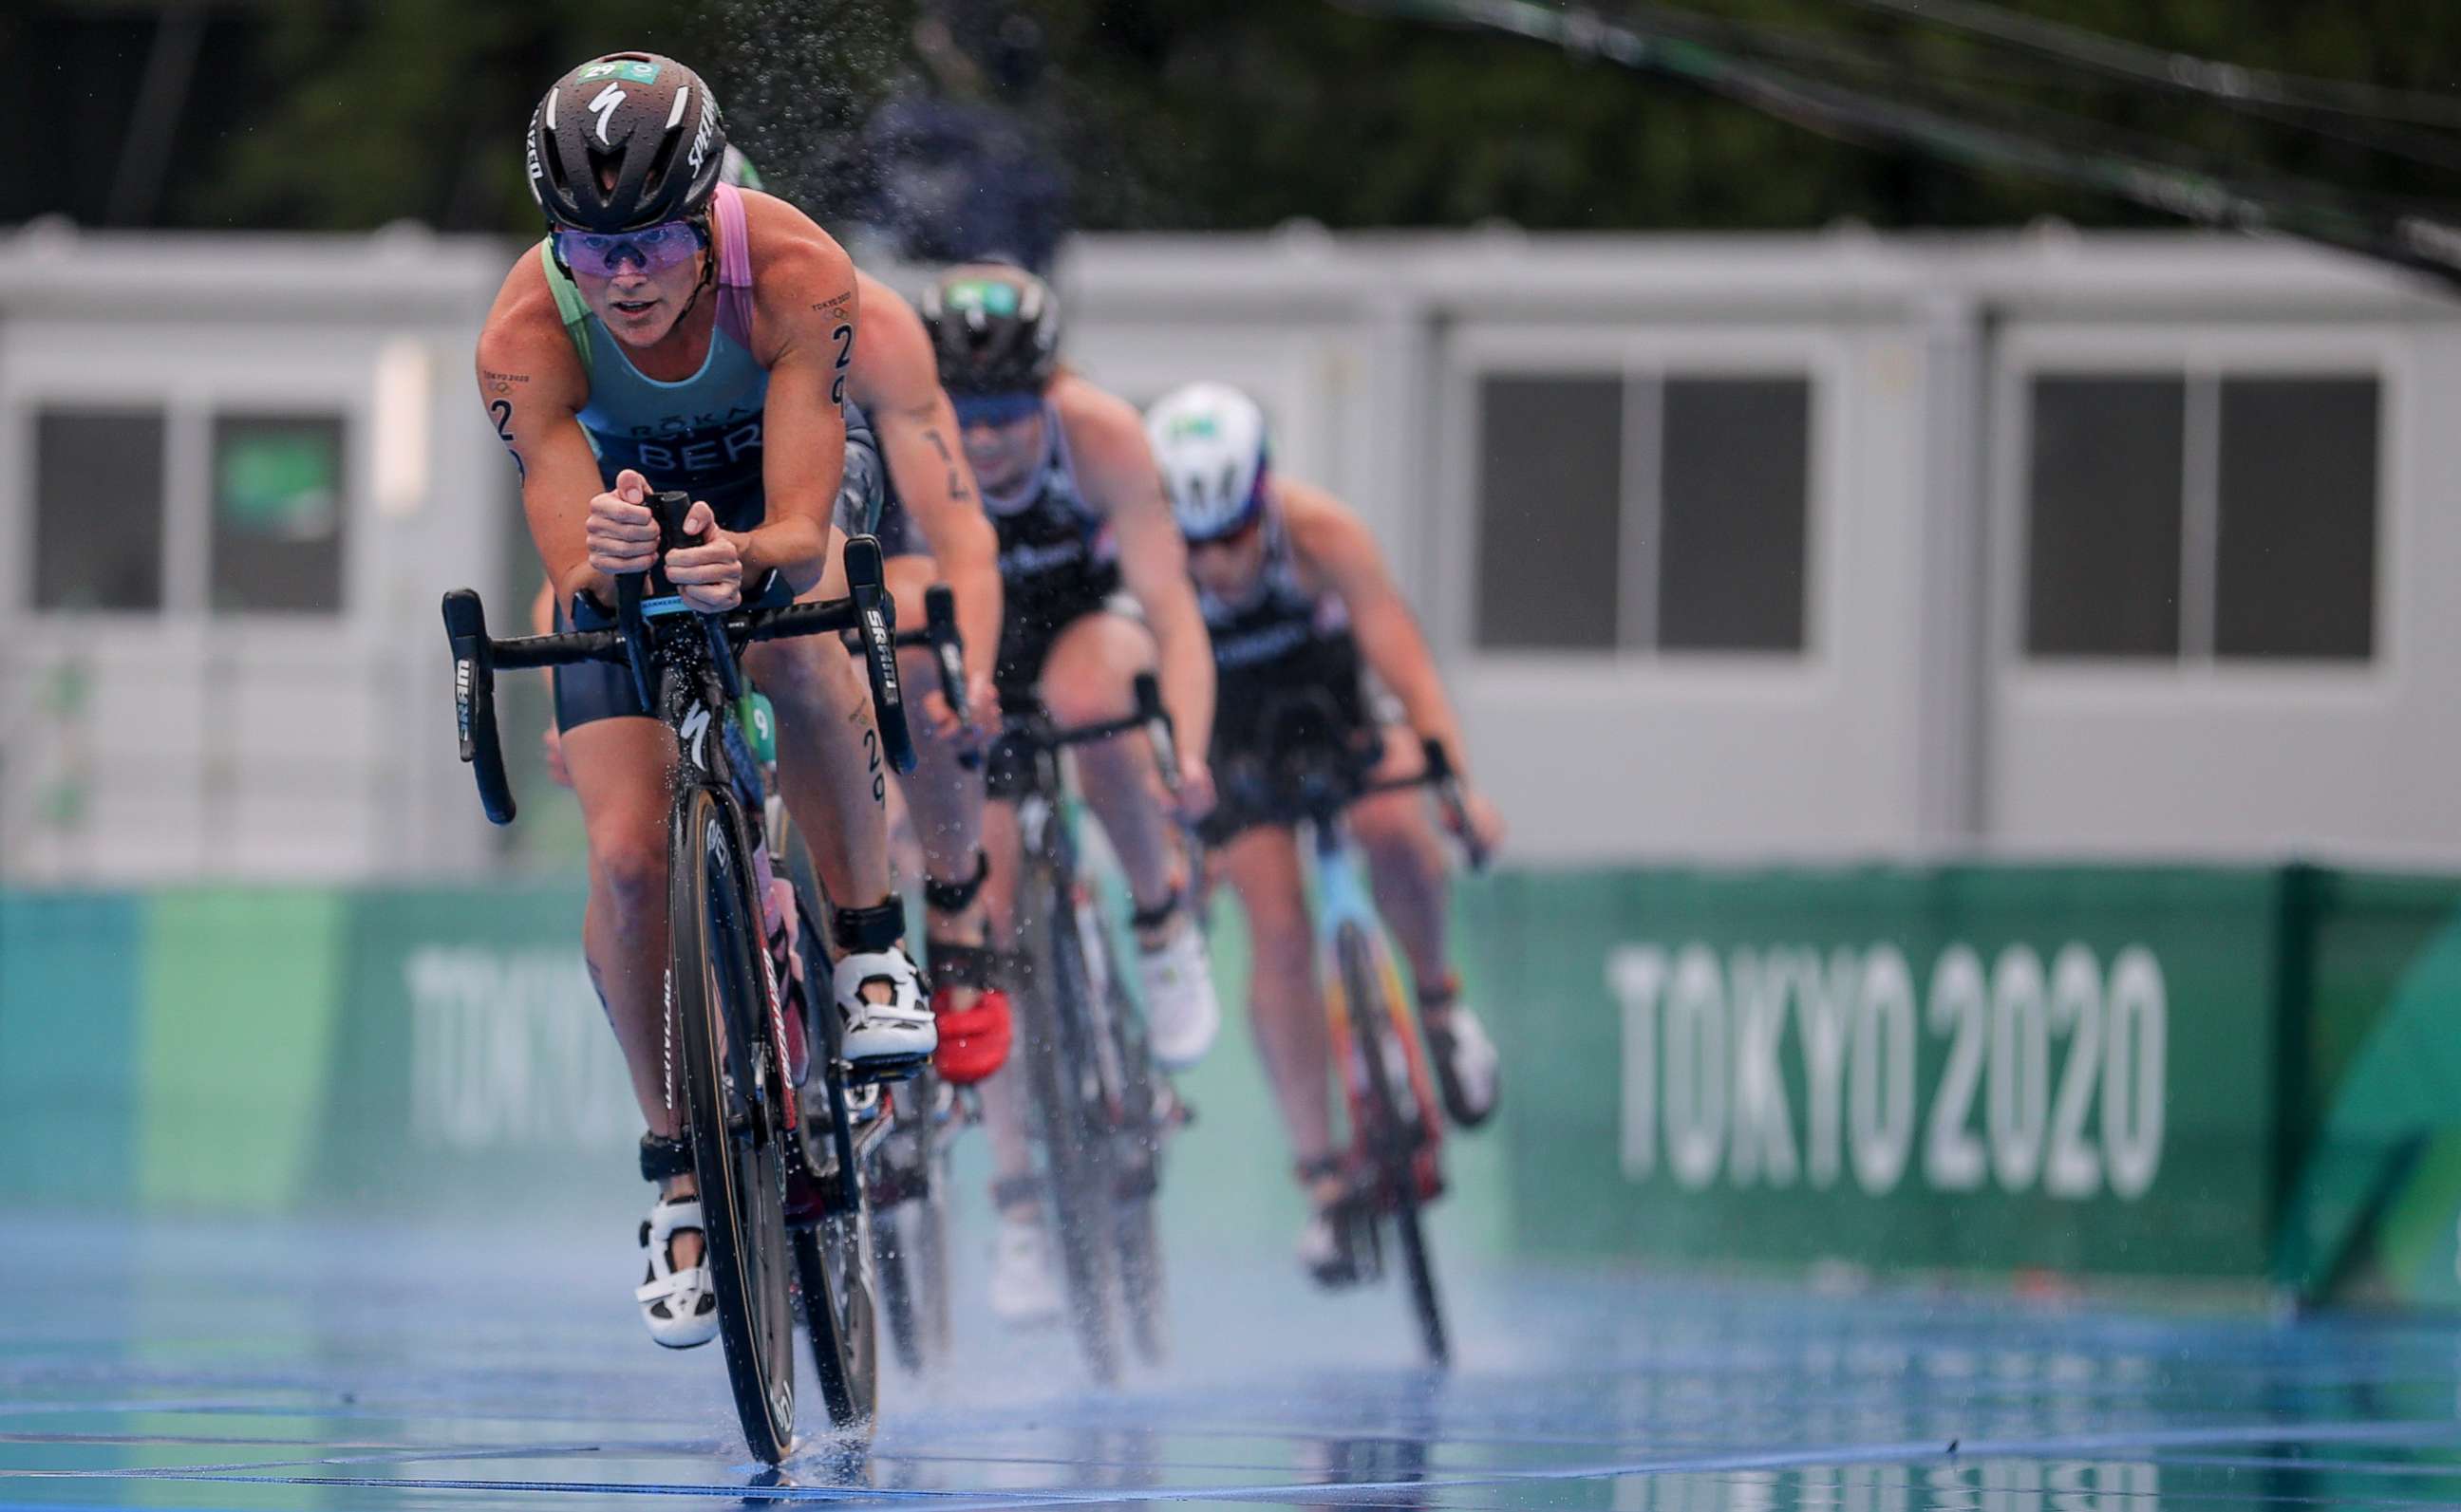 PHOTO: Flora Duffy of Bermuda competes during Tokyo 2020 women's individual final of triathlon in Tokyo, Japan, July 27, 2021.